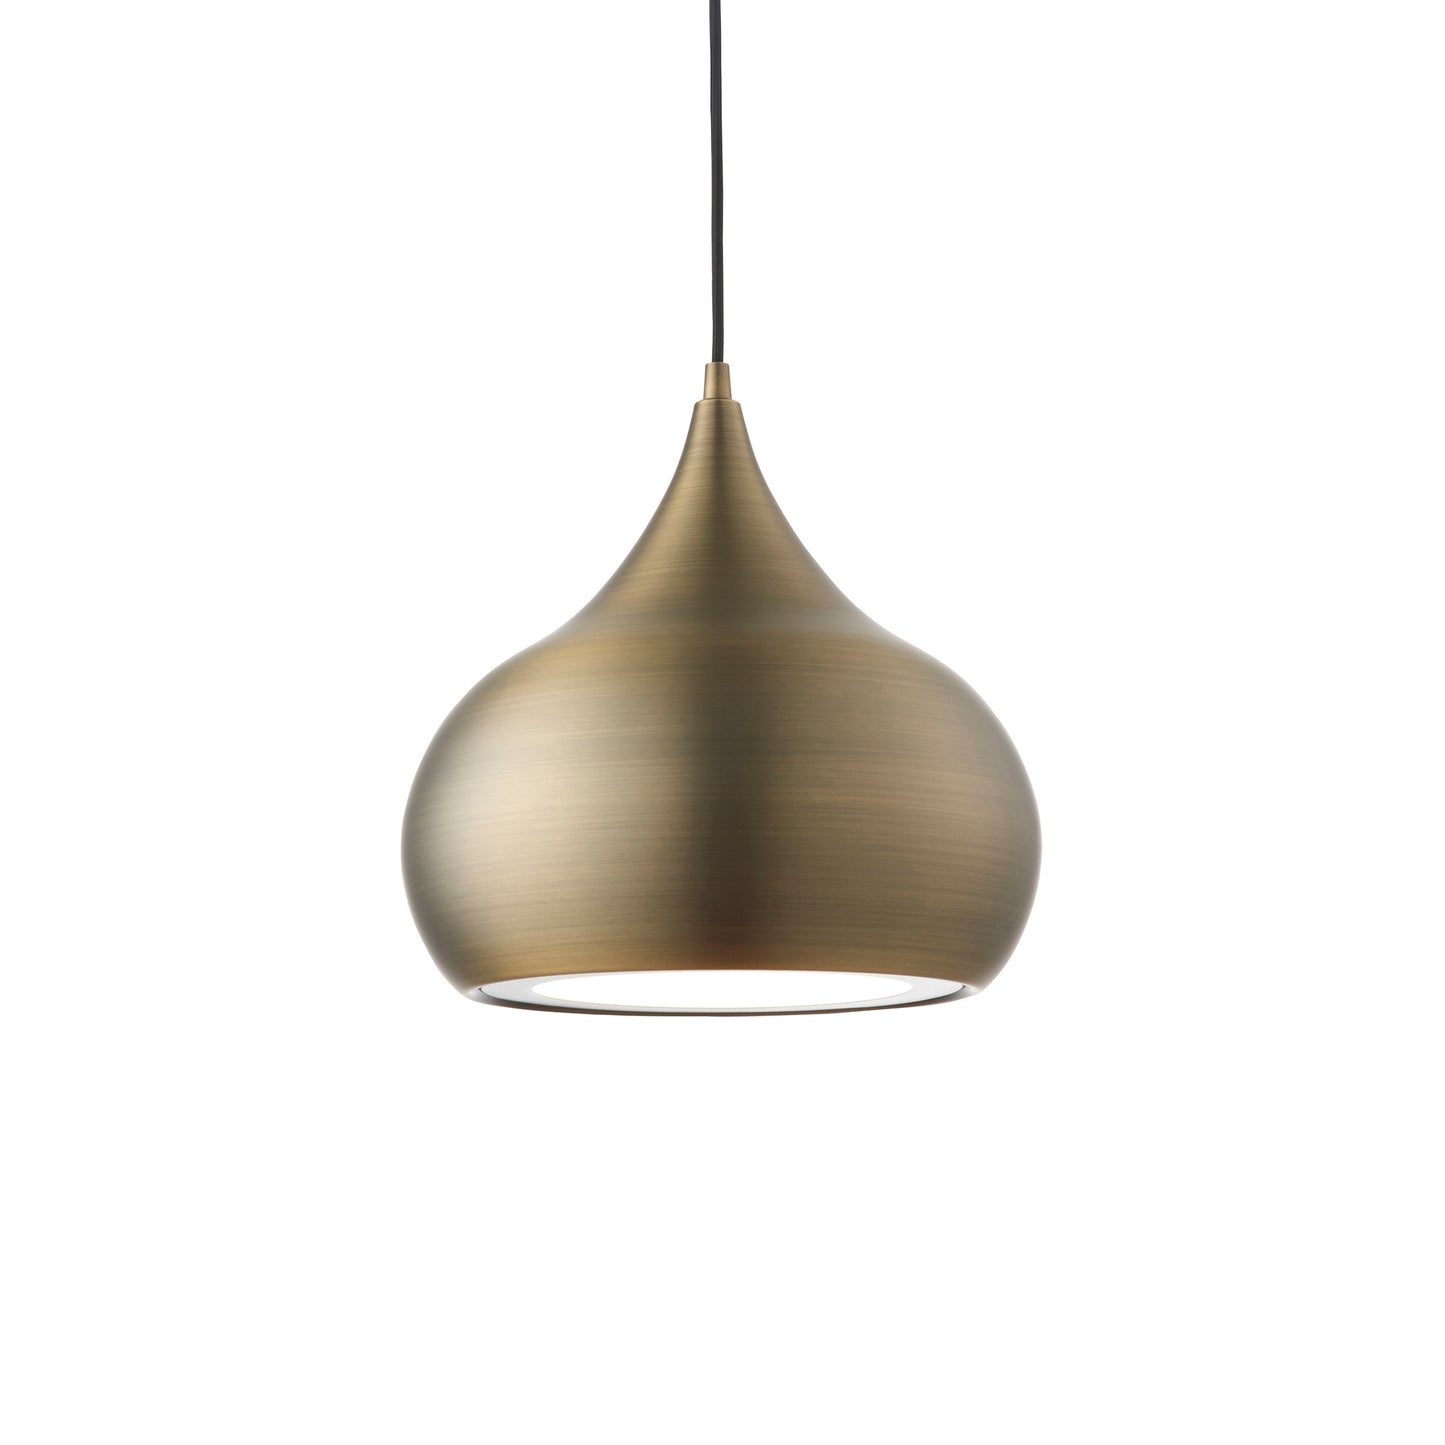 A Brosser Pendant Light Antique Brass, from Kikiathome.co.uk, hanging as interior decor.